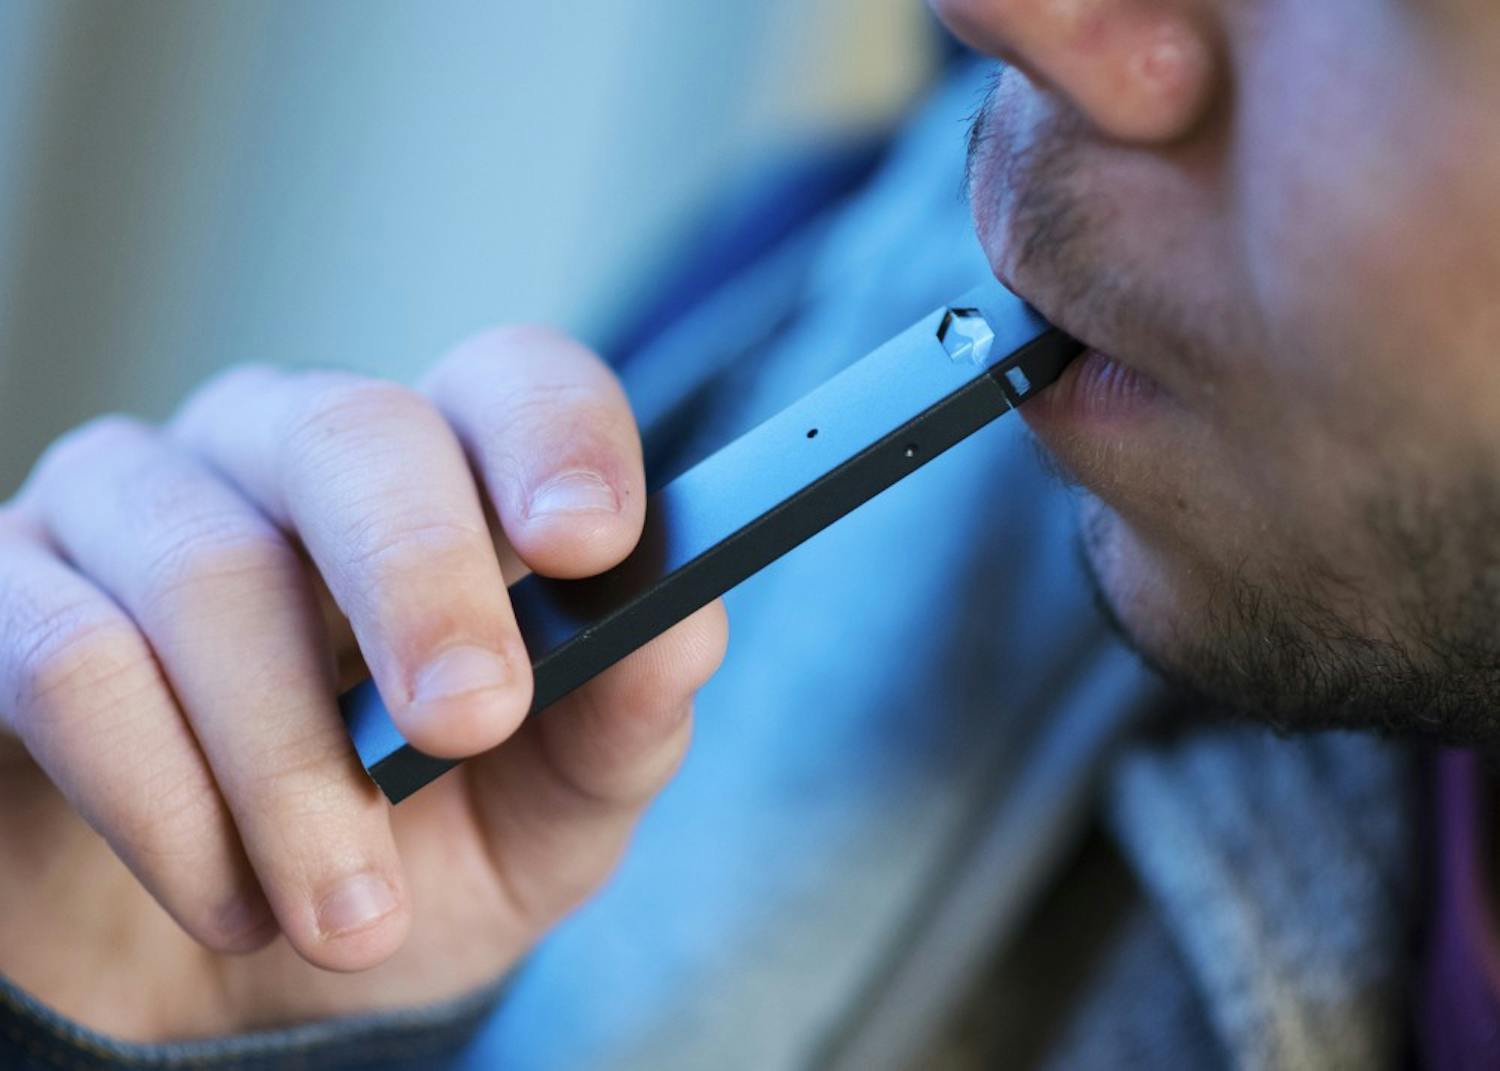 The JUUL is a type of small, USB-chargeable vaporizer, more commonly known as a ‘vape.' This kind of vape contains nicotine and is therefore illegal for minors to use.